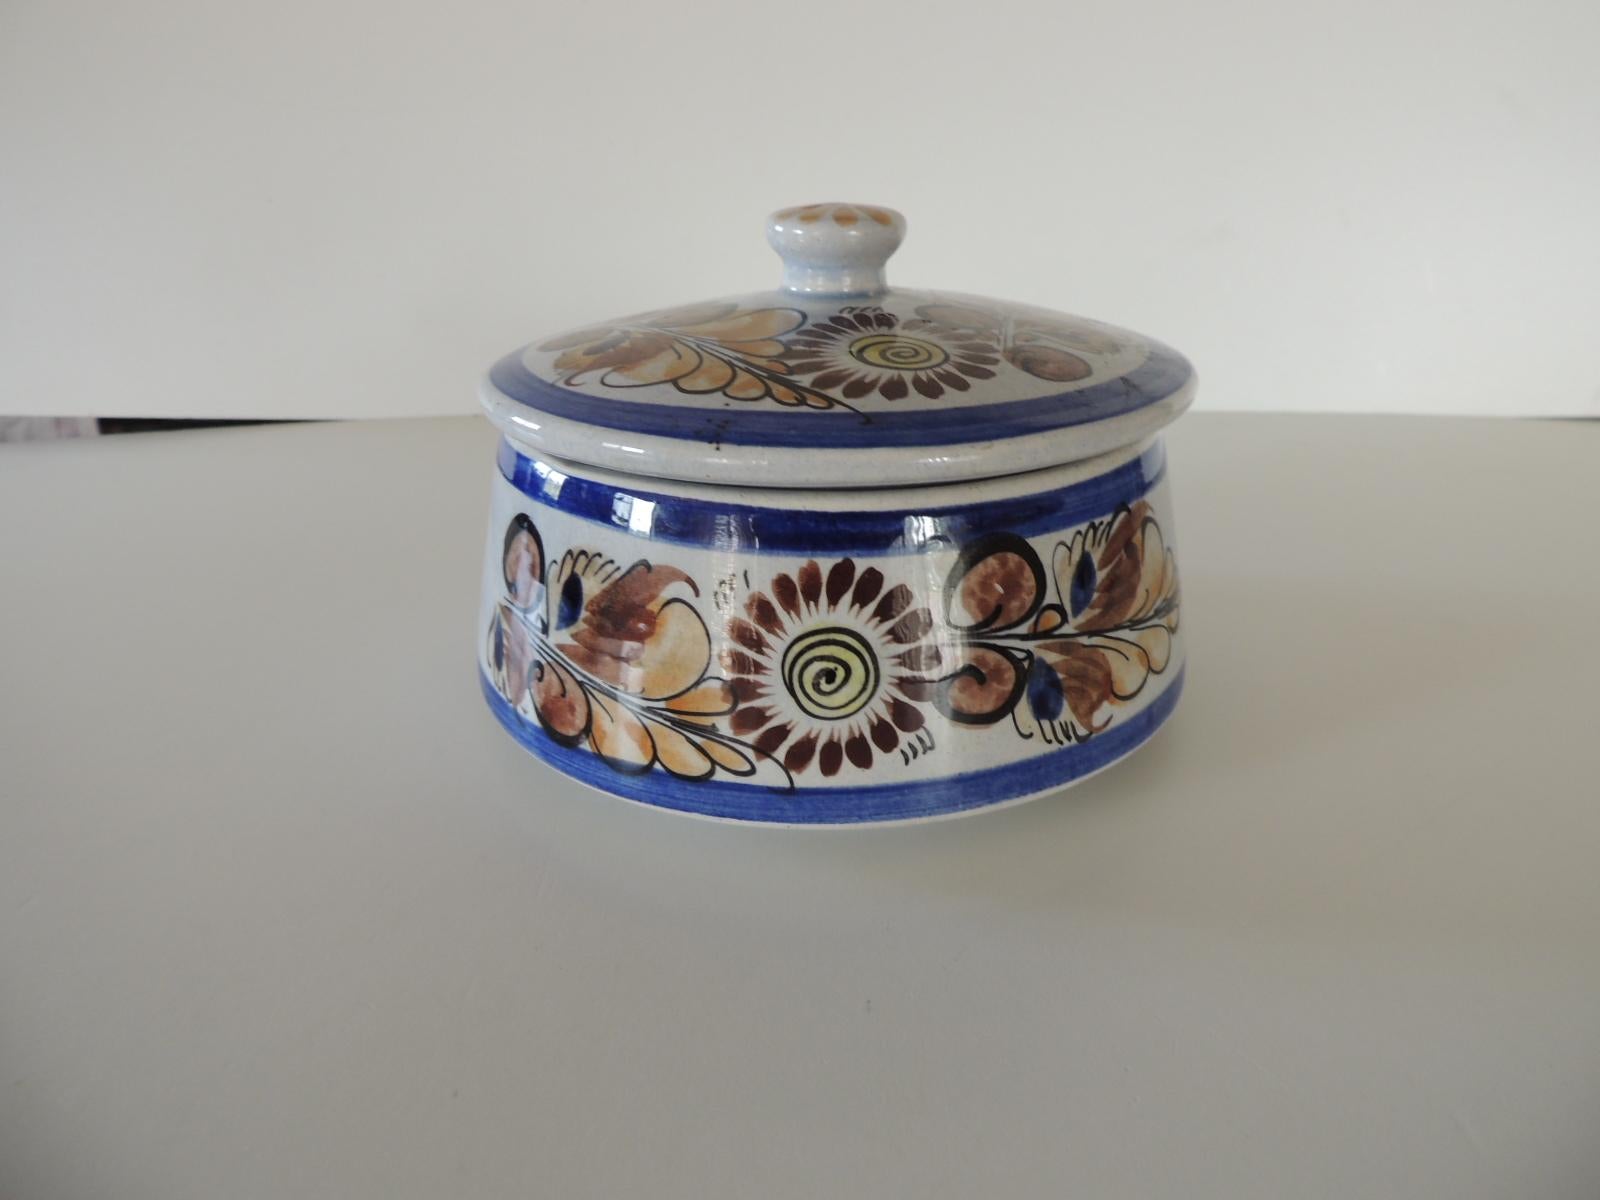 Round blue and brown Mexican Tonala ceramic decorative box
Floral pattern lidded box.
Signed
Size: 5.5